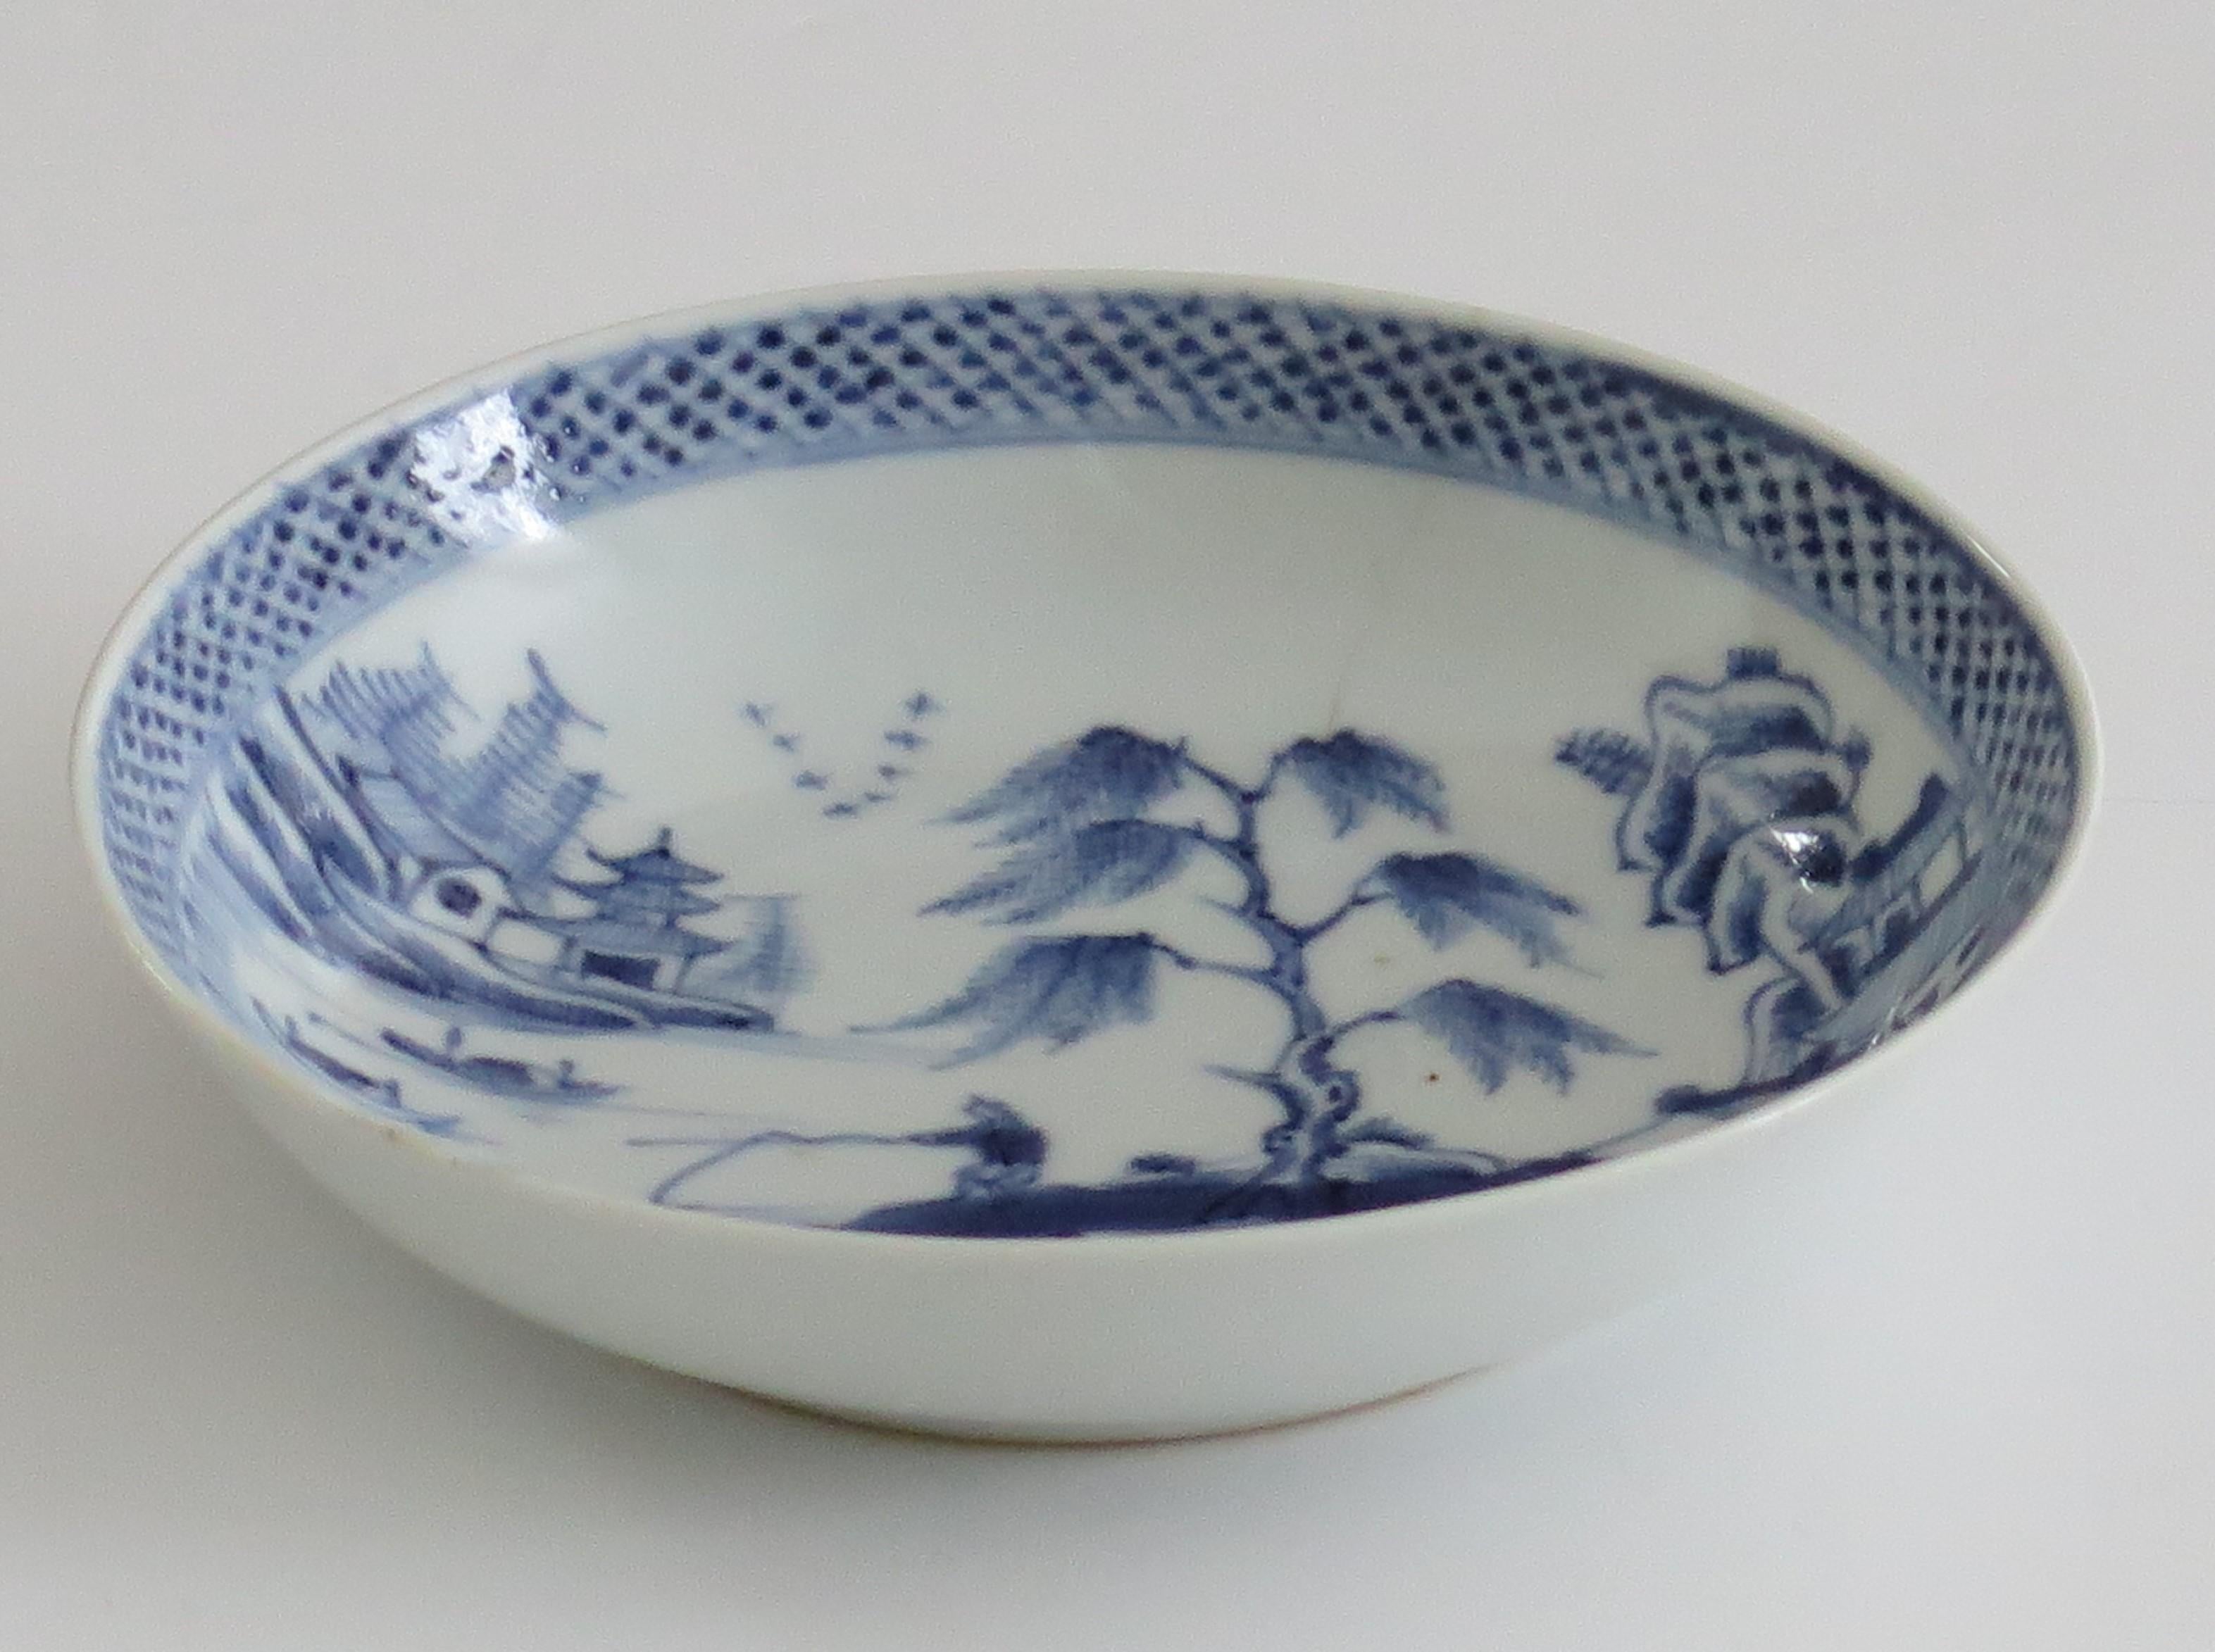 This is a Chinese export porcelain blue and white 